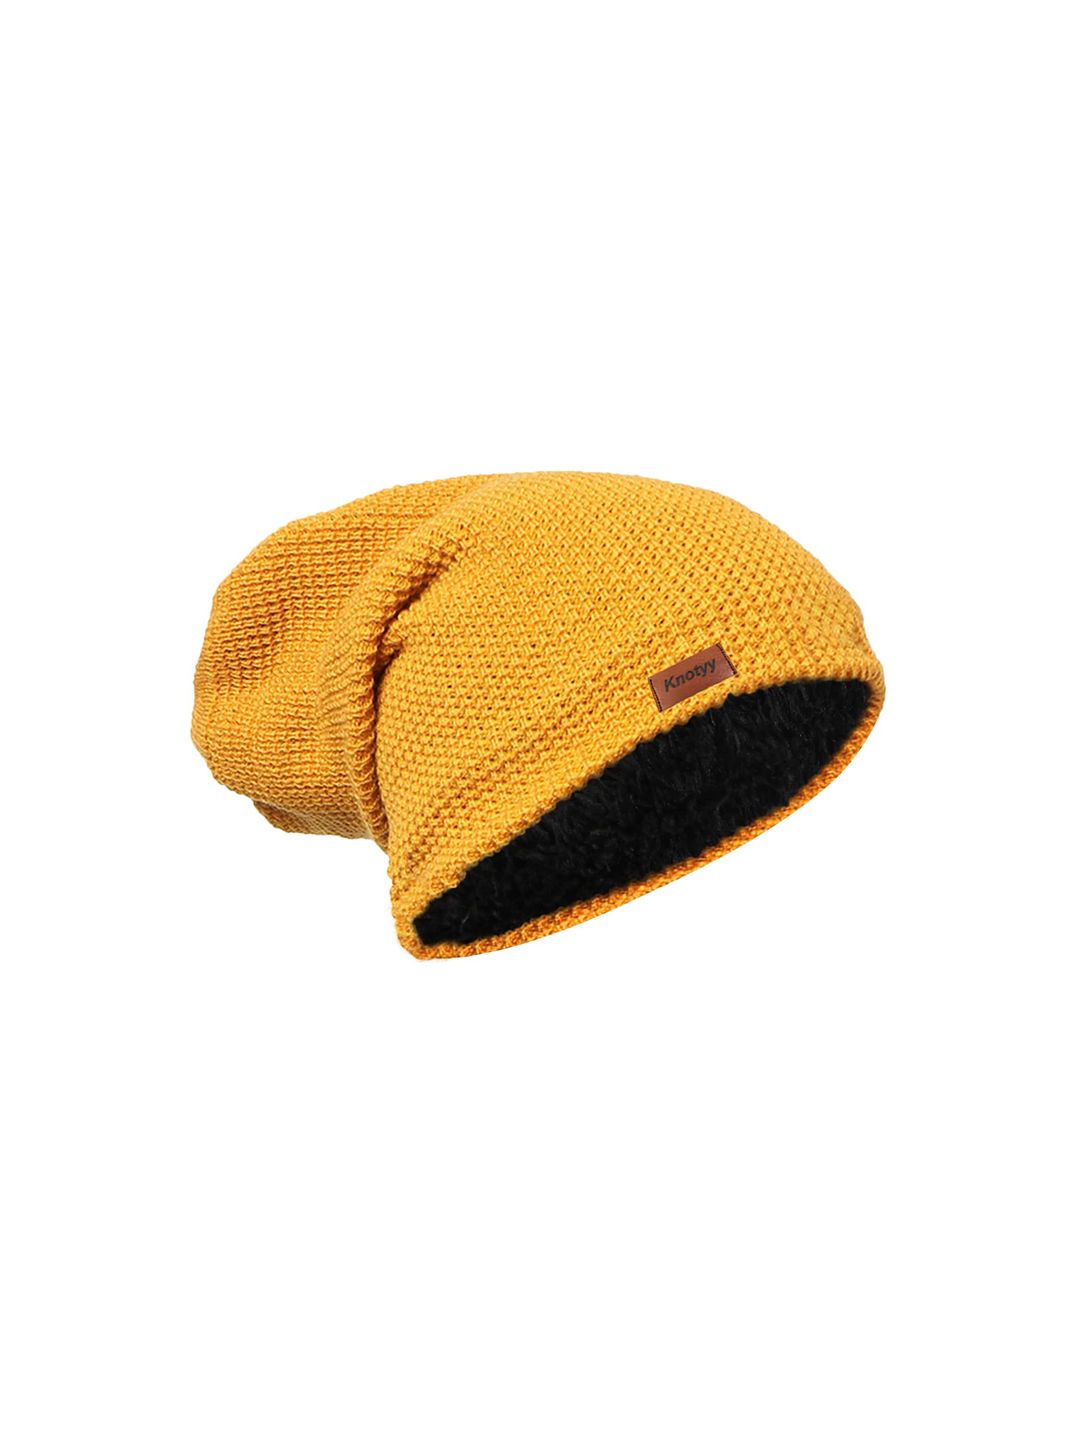 Knotyy Unisex Yellow Solid Beanie Cap Price in India